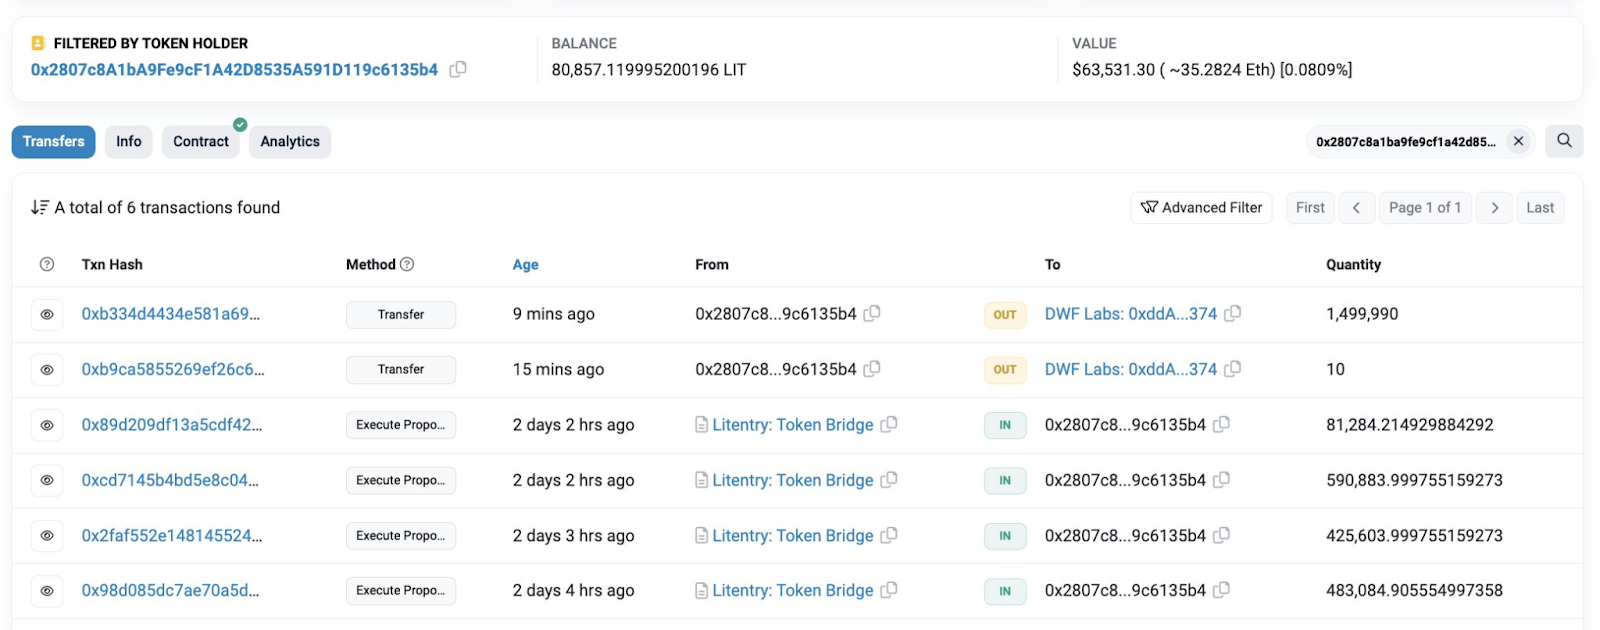 Etherscan data of DWF Labs